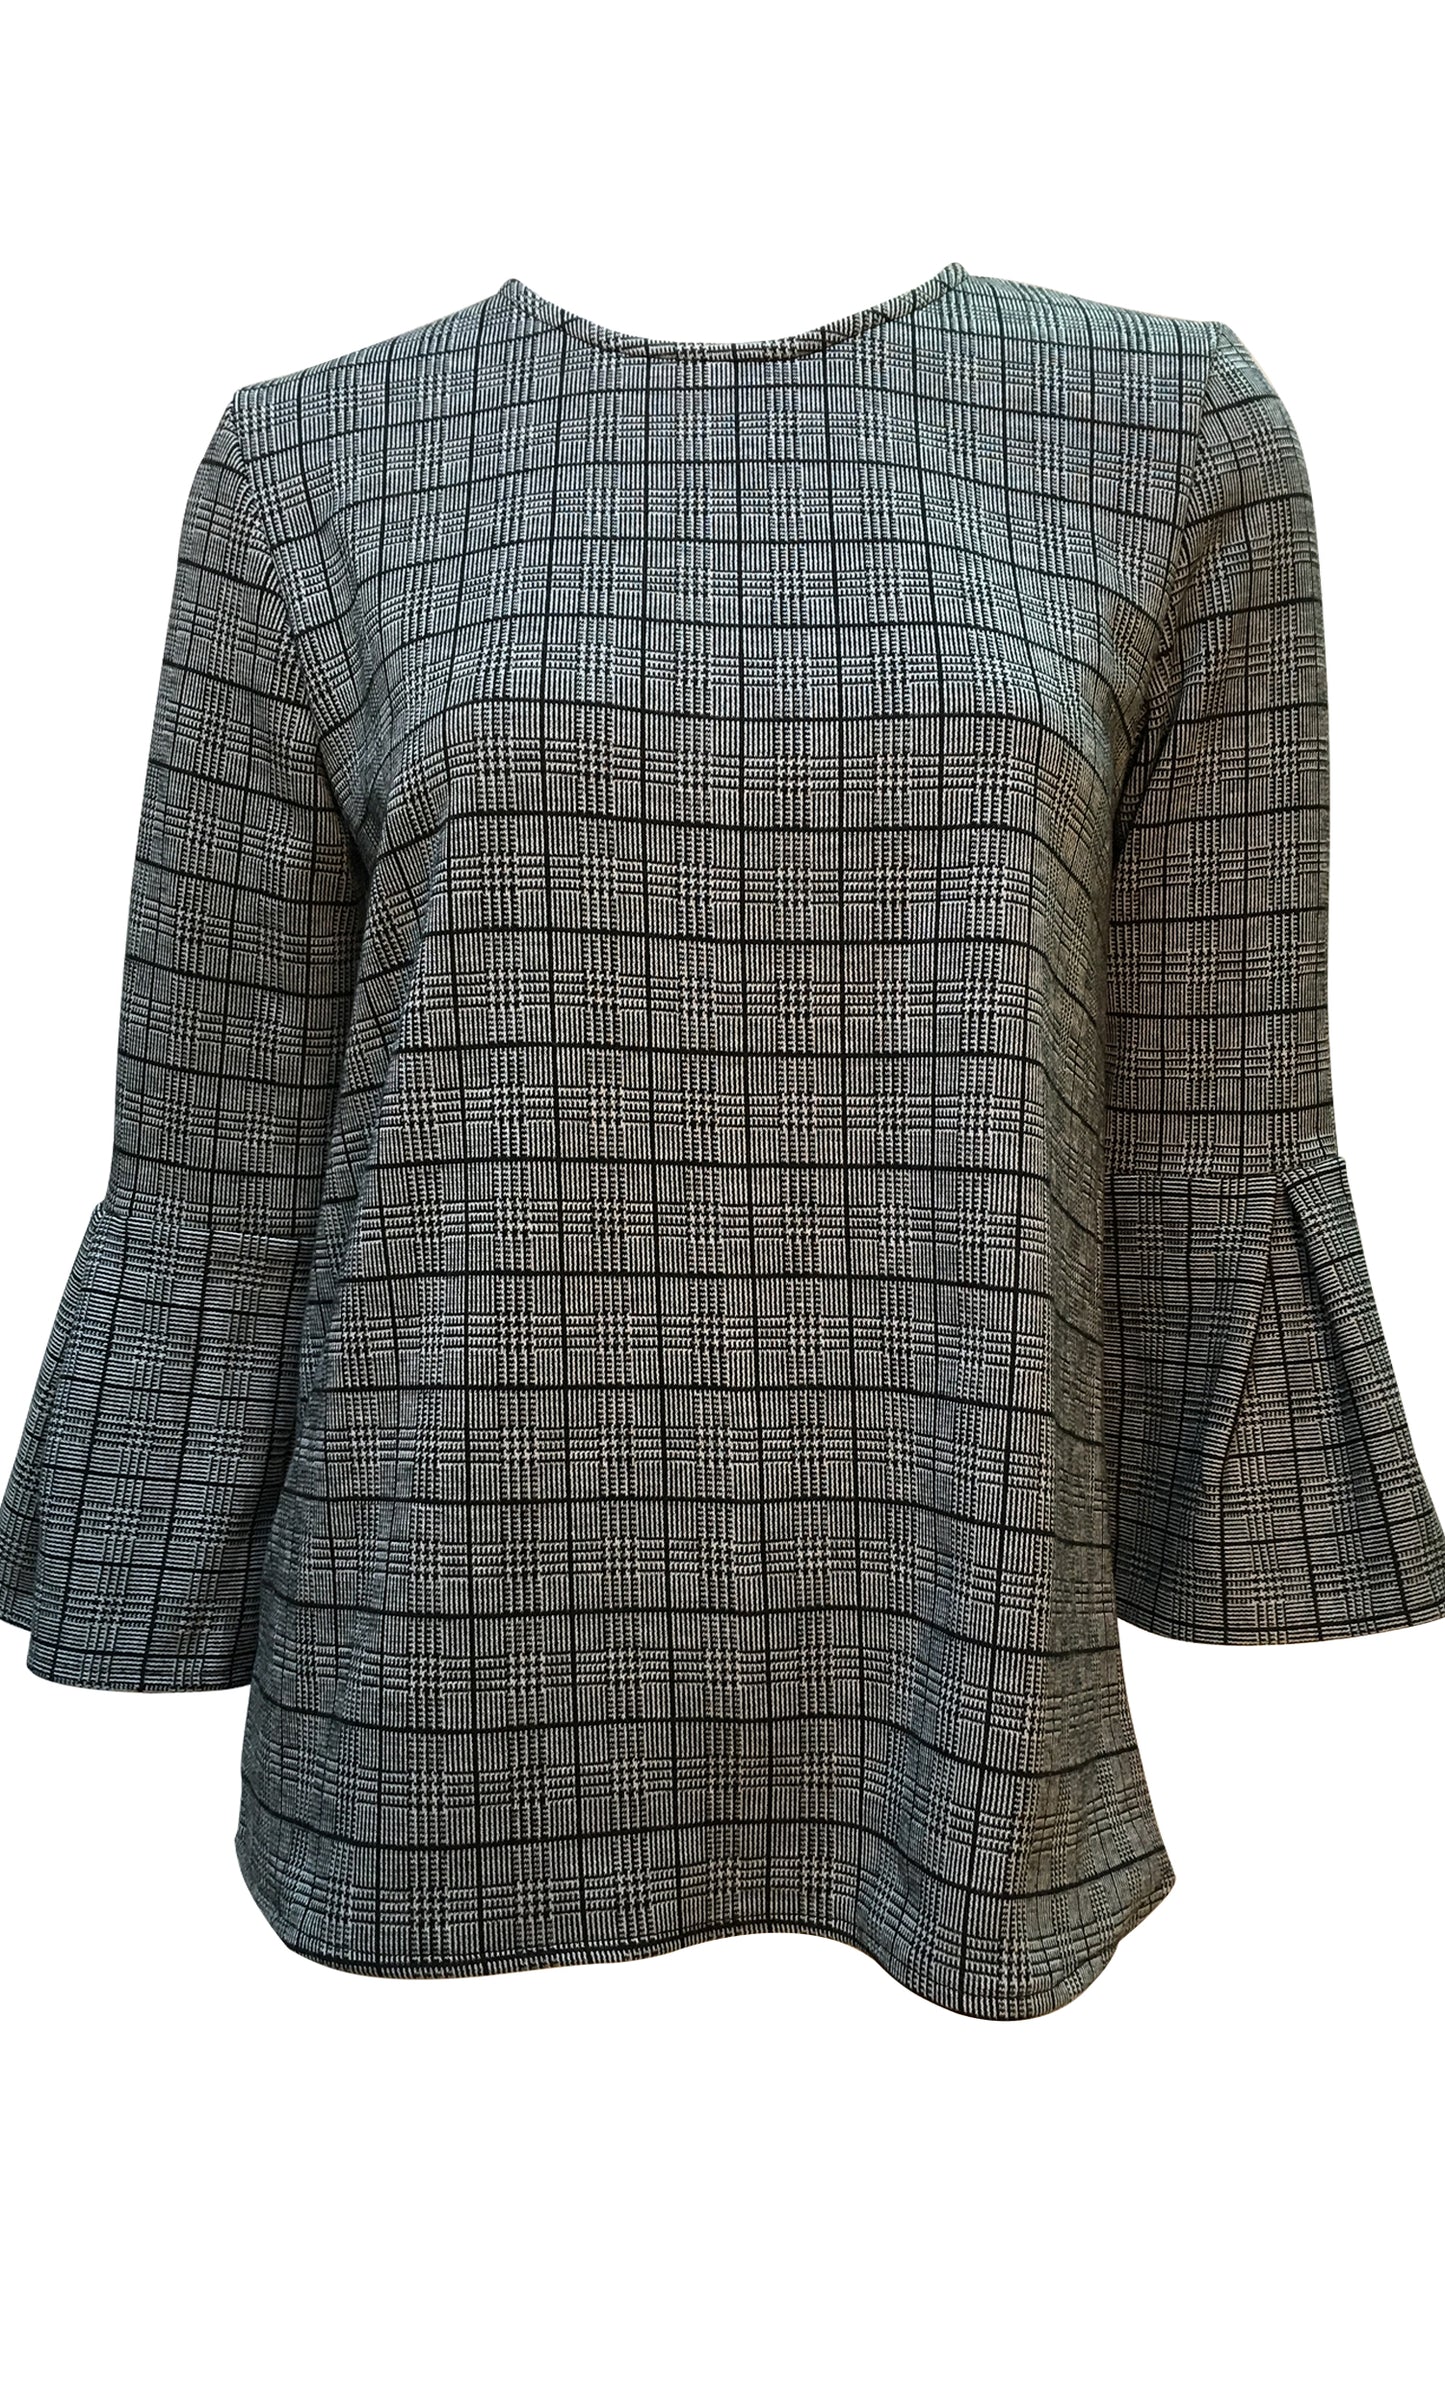 RC0763-2TB Grey/Black Long Sleeve Checked Top (Pack)